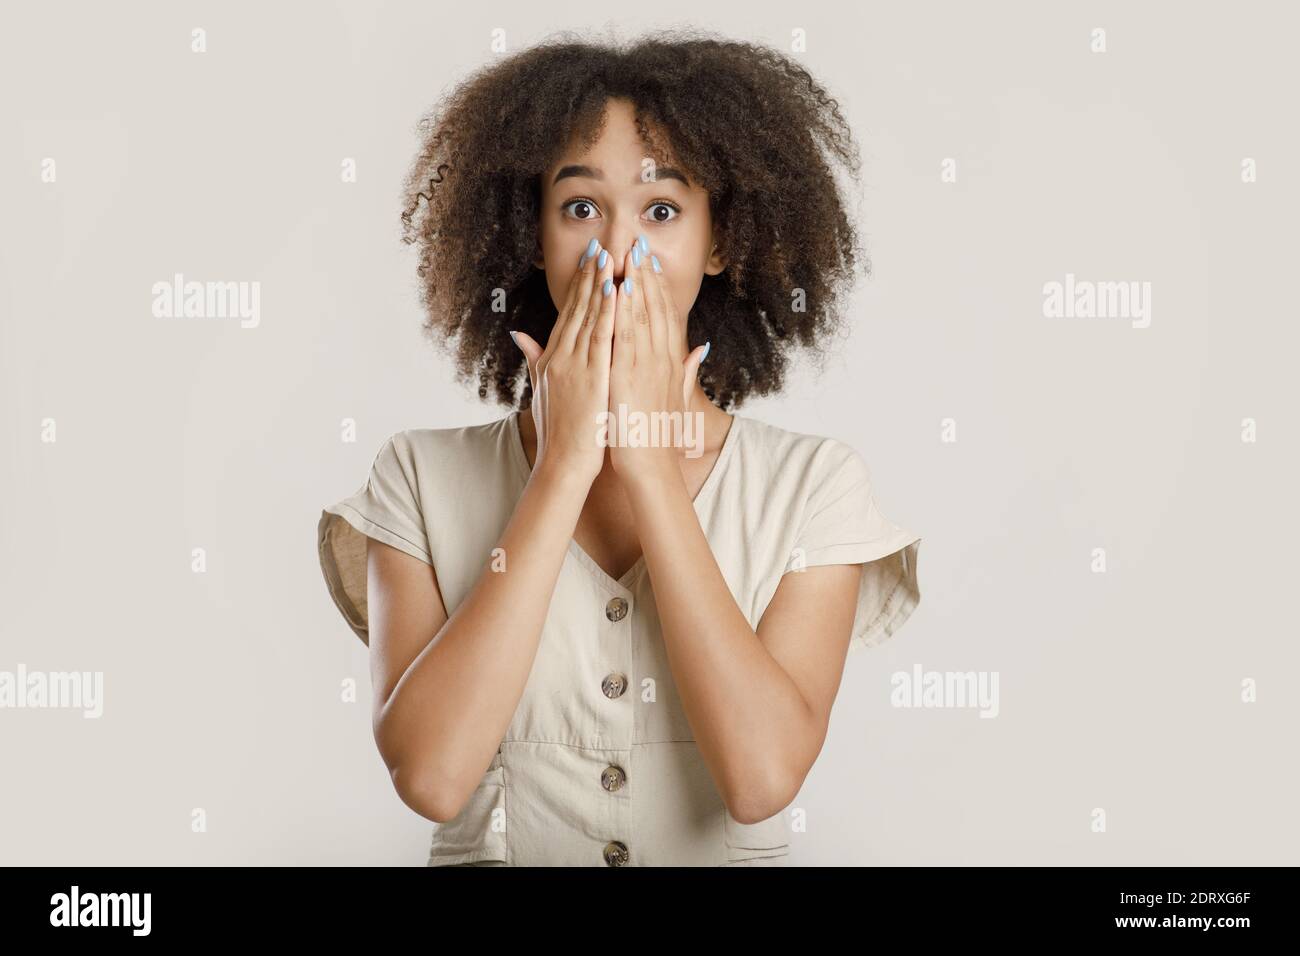 Expressing excitement, shocking news, fright and unusual proposal Stock Photo